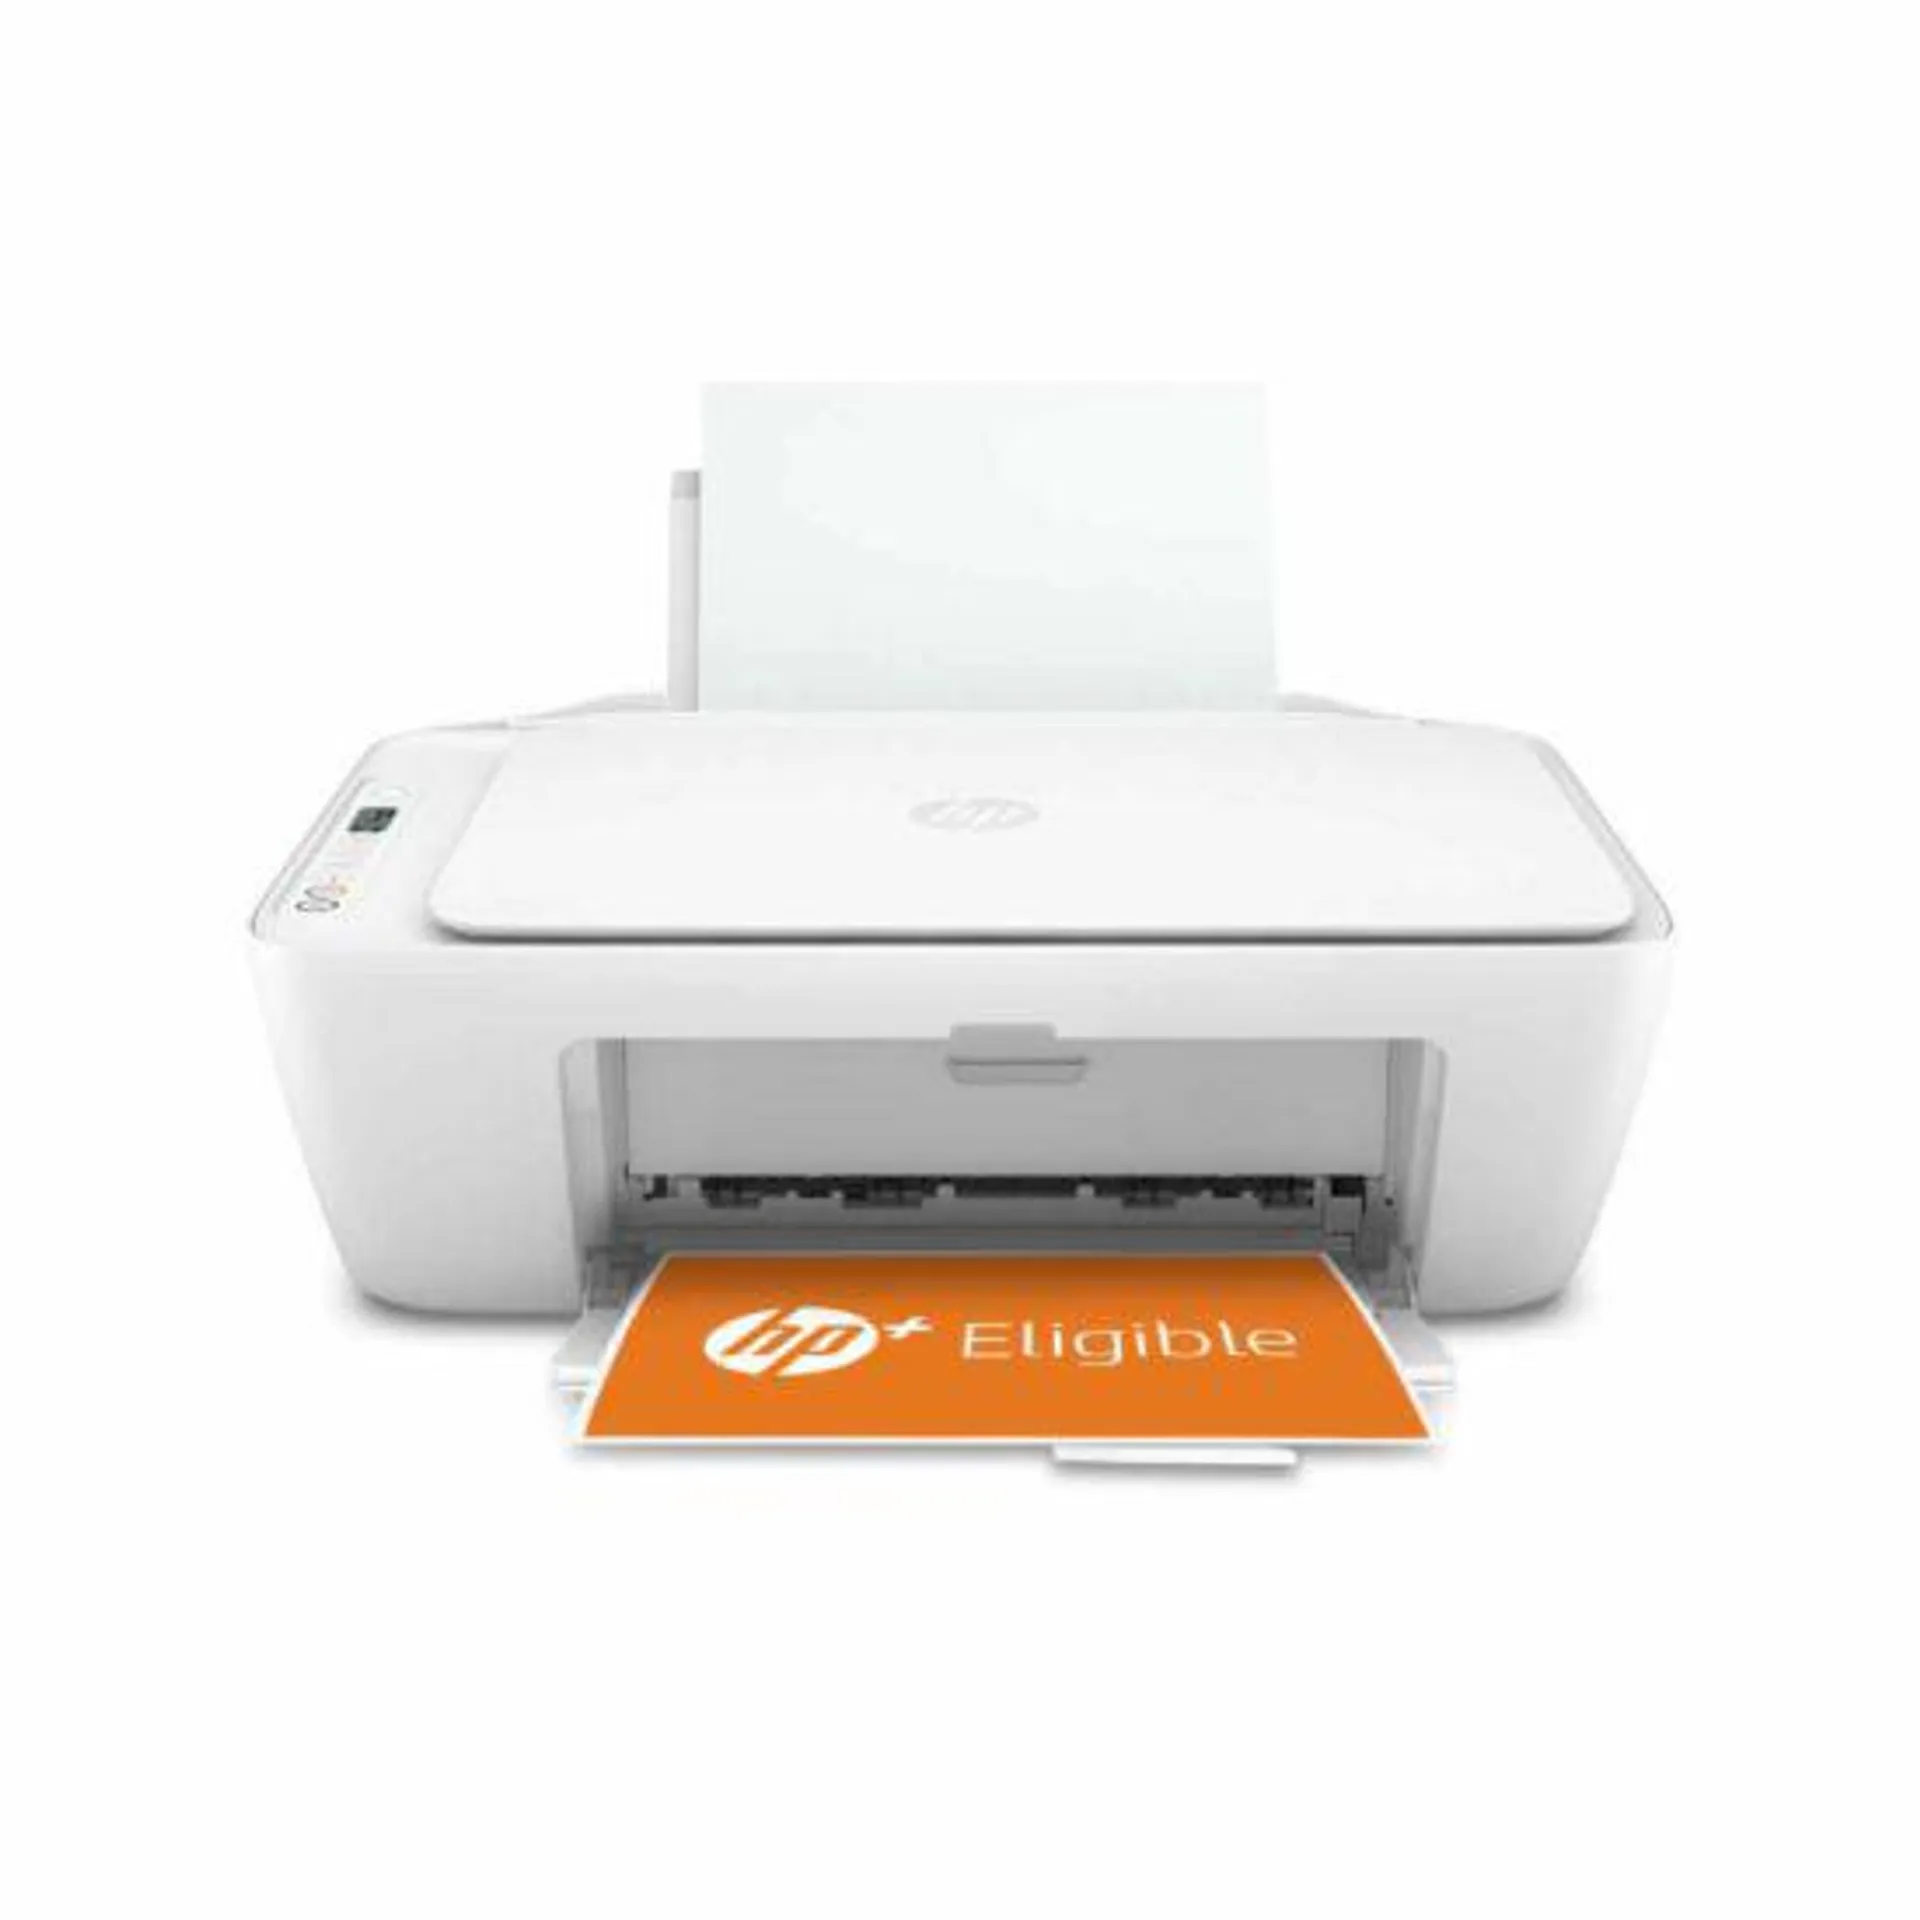 HP Deskjet 2710e All in One Wireless Inkjet Printer with HP Plus and 6 Months Instant Ink